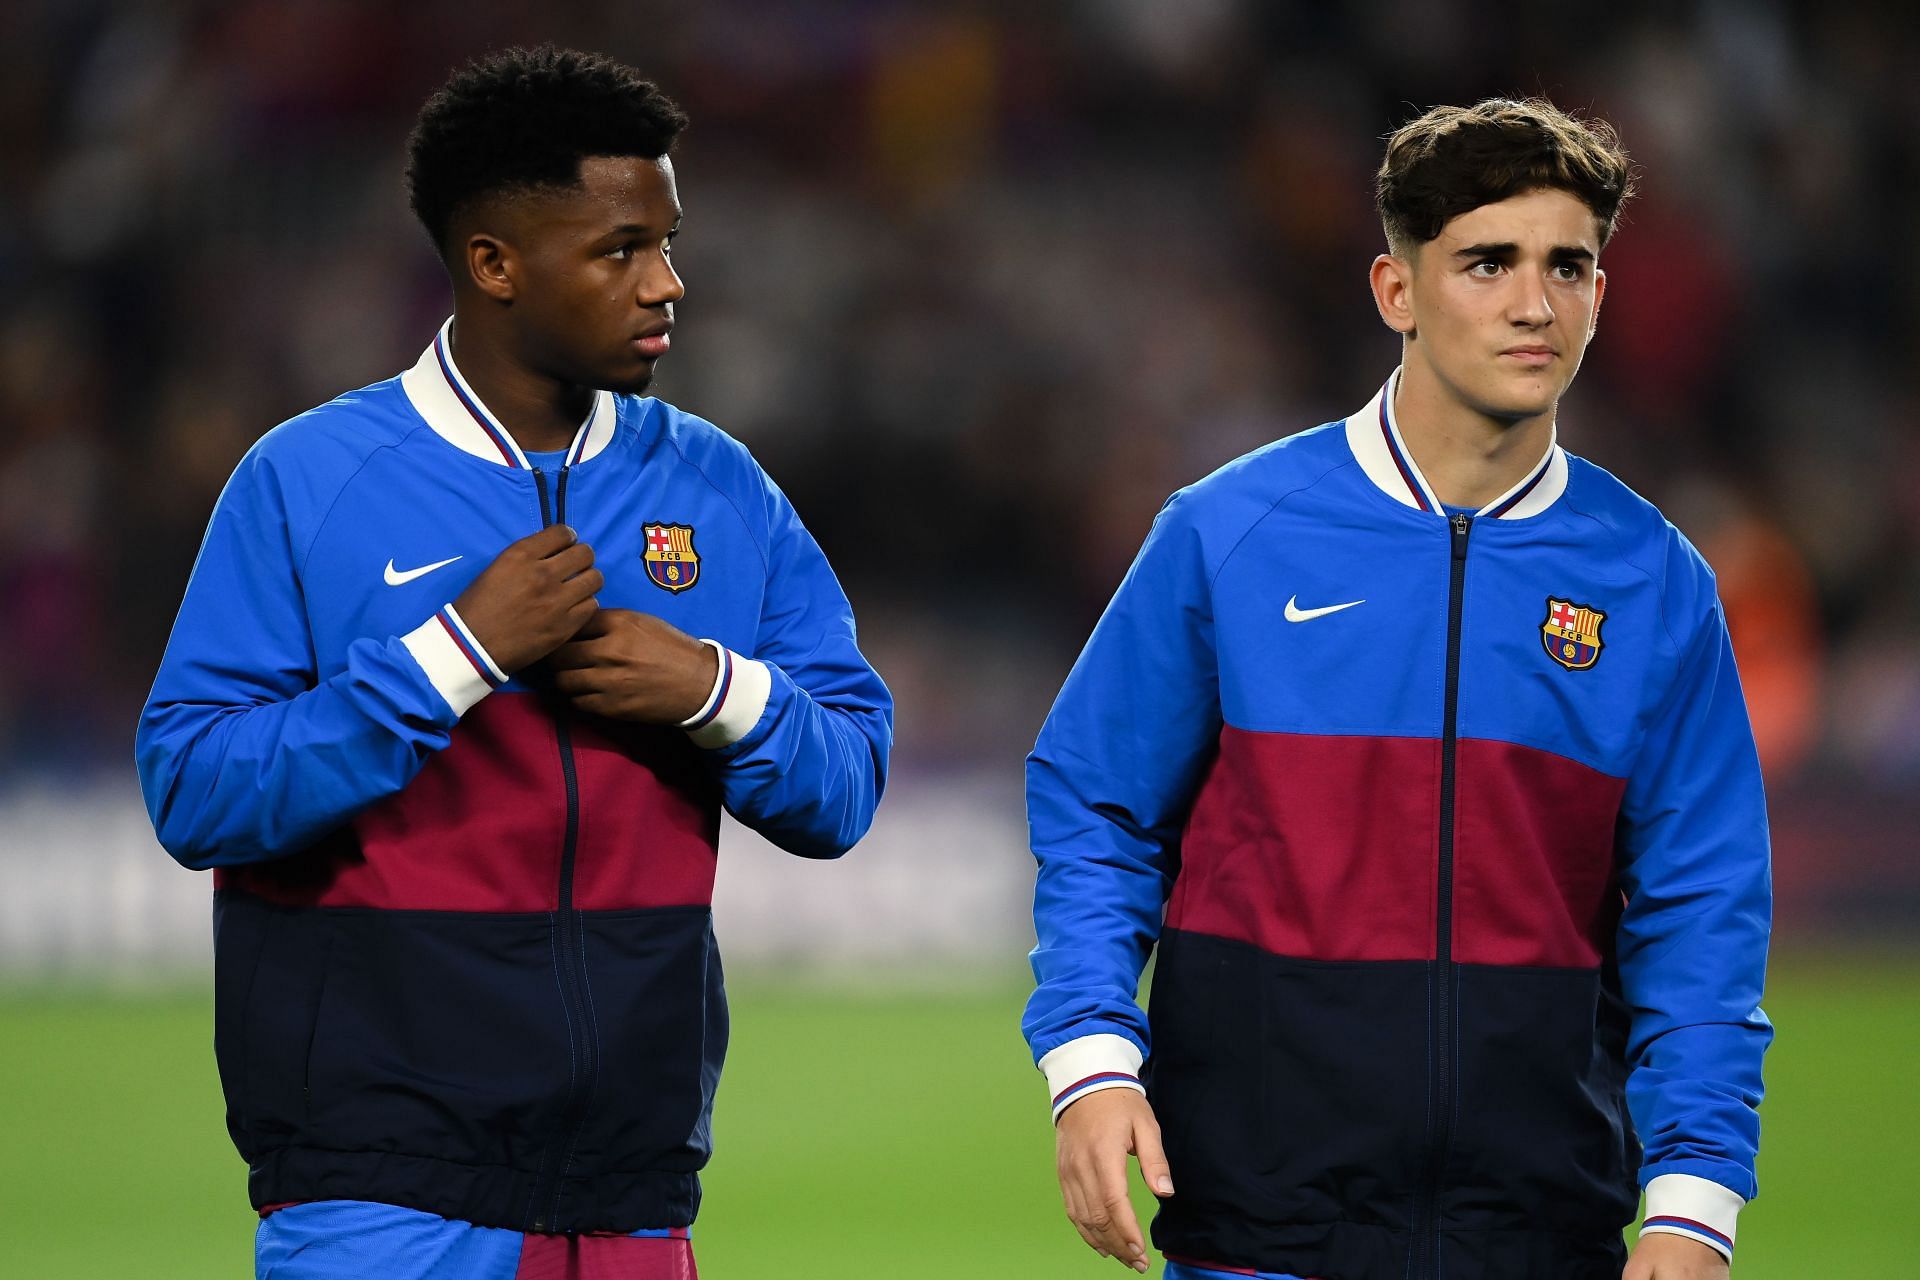 Barcelona have some exciting young talents in their ranks.